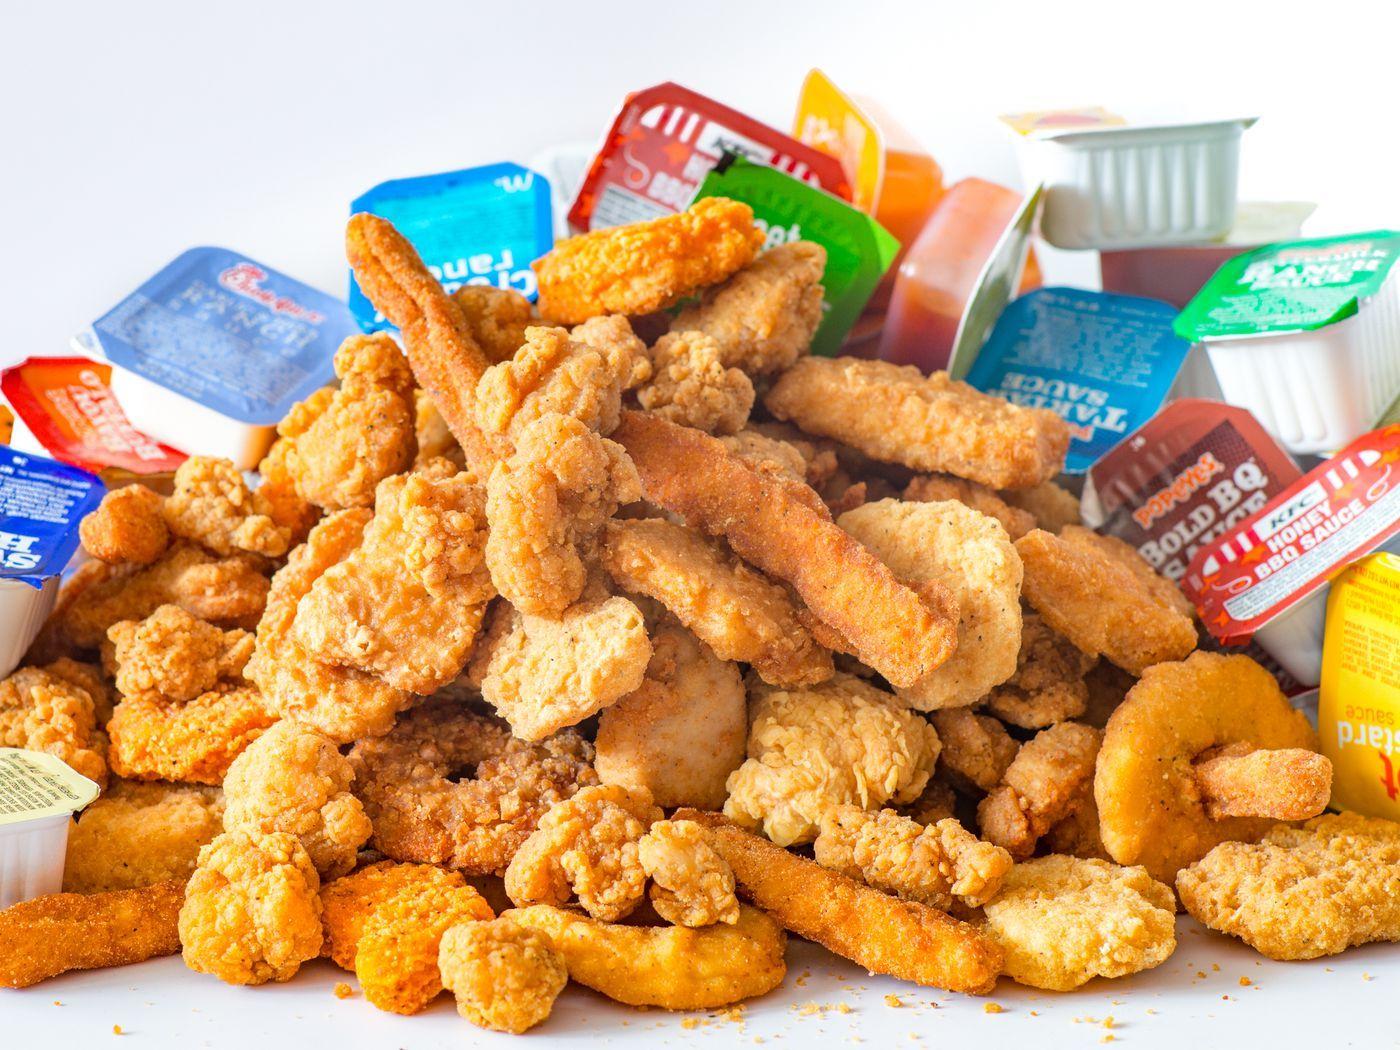 Ranking America's Fast Food Chicken Nuggets